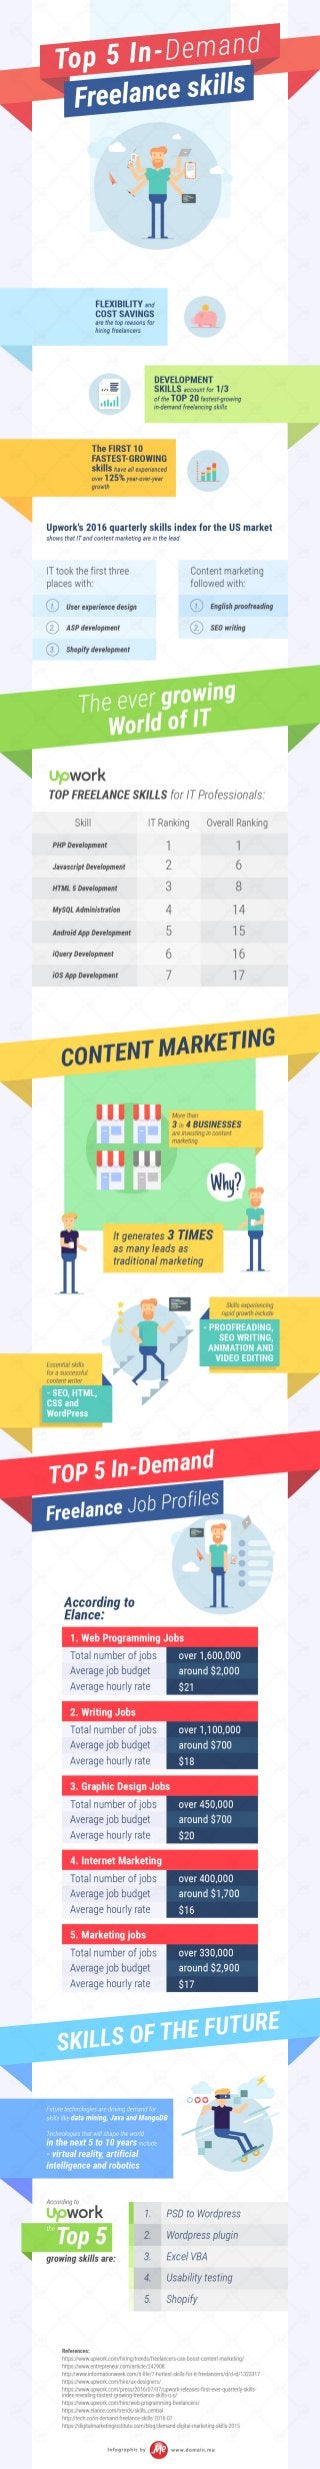 [INFOGRAPHIC] Top In-Demand Freelance Skills